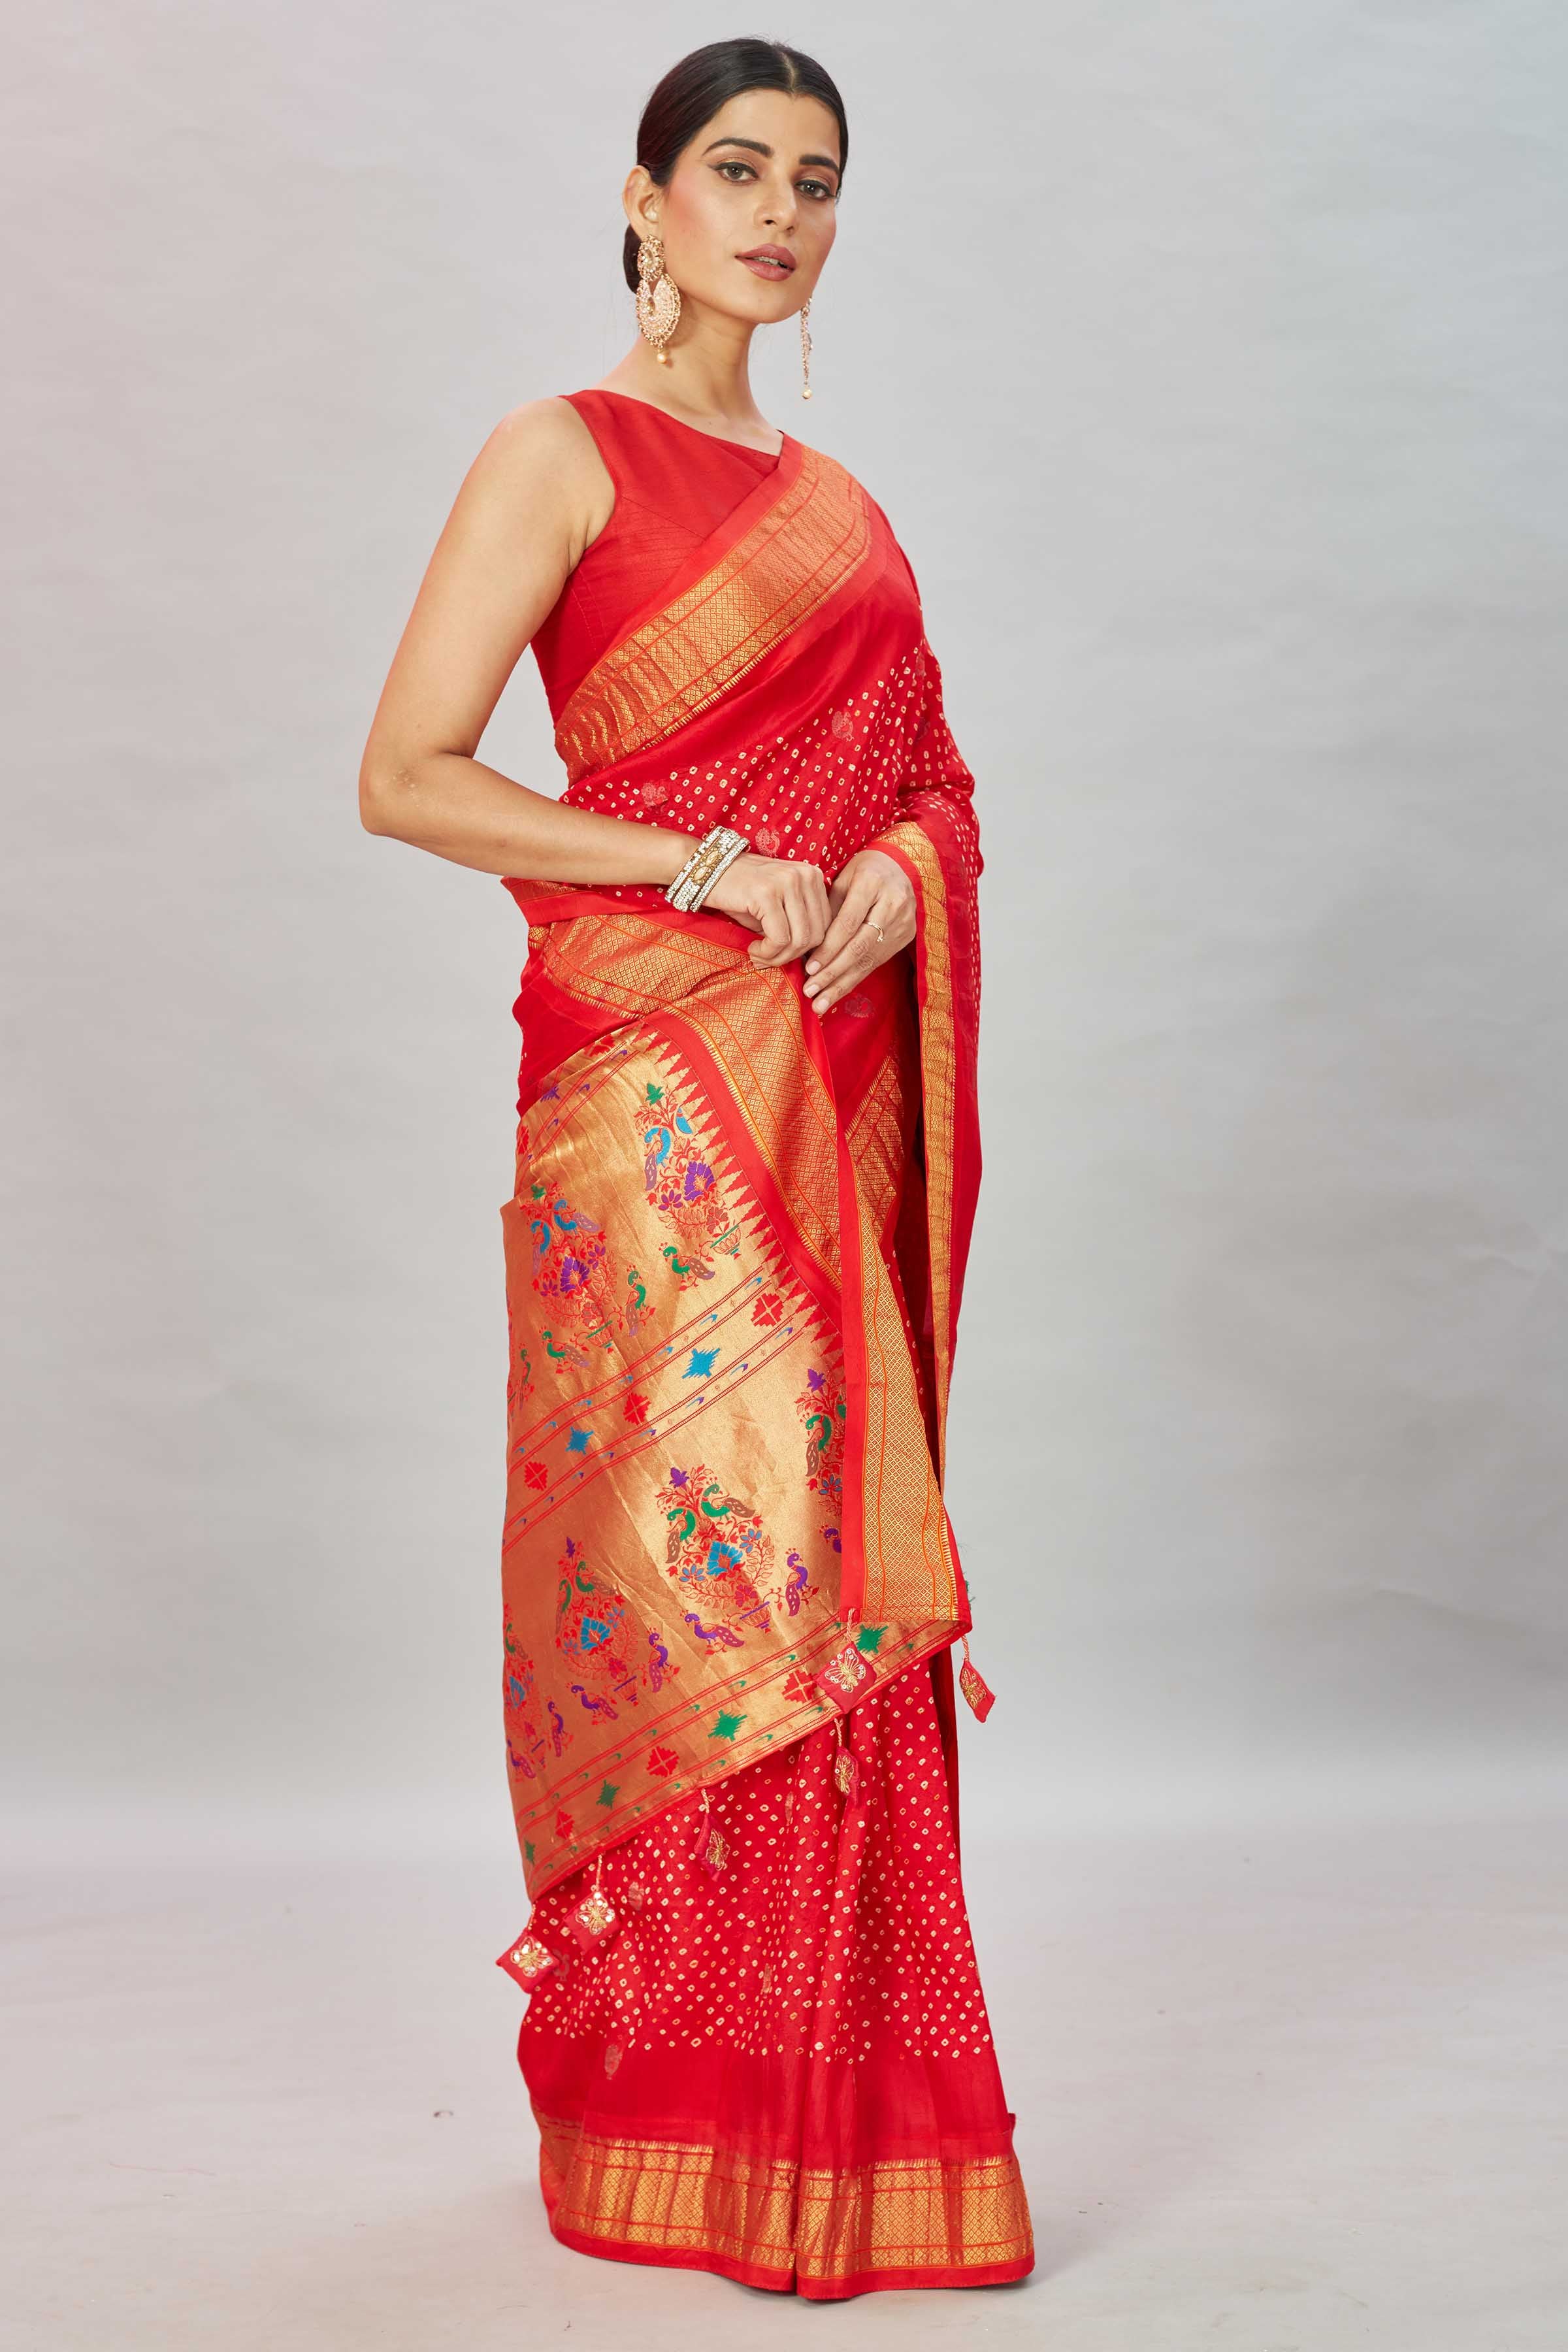 Shop red bandhej Kanjivaram silk sari online in USA with Paithani pallu. Look your best on festive occasions in latest designer sarees, pure silk sarees, Kanjivaram silk saris, handwoven saris, tussar silk sarees, embroidered saris from Pure Elegance Indian clothing store in USA.-side